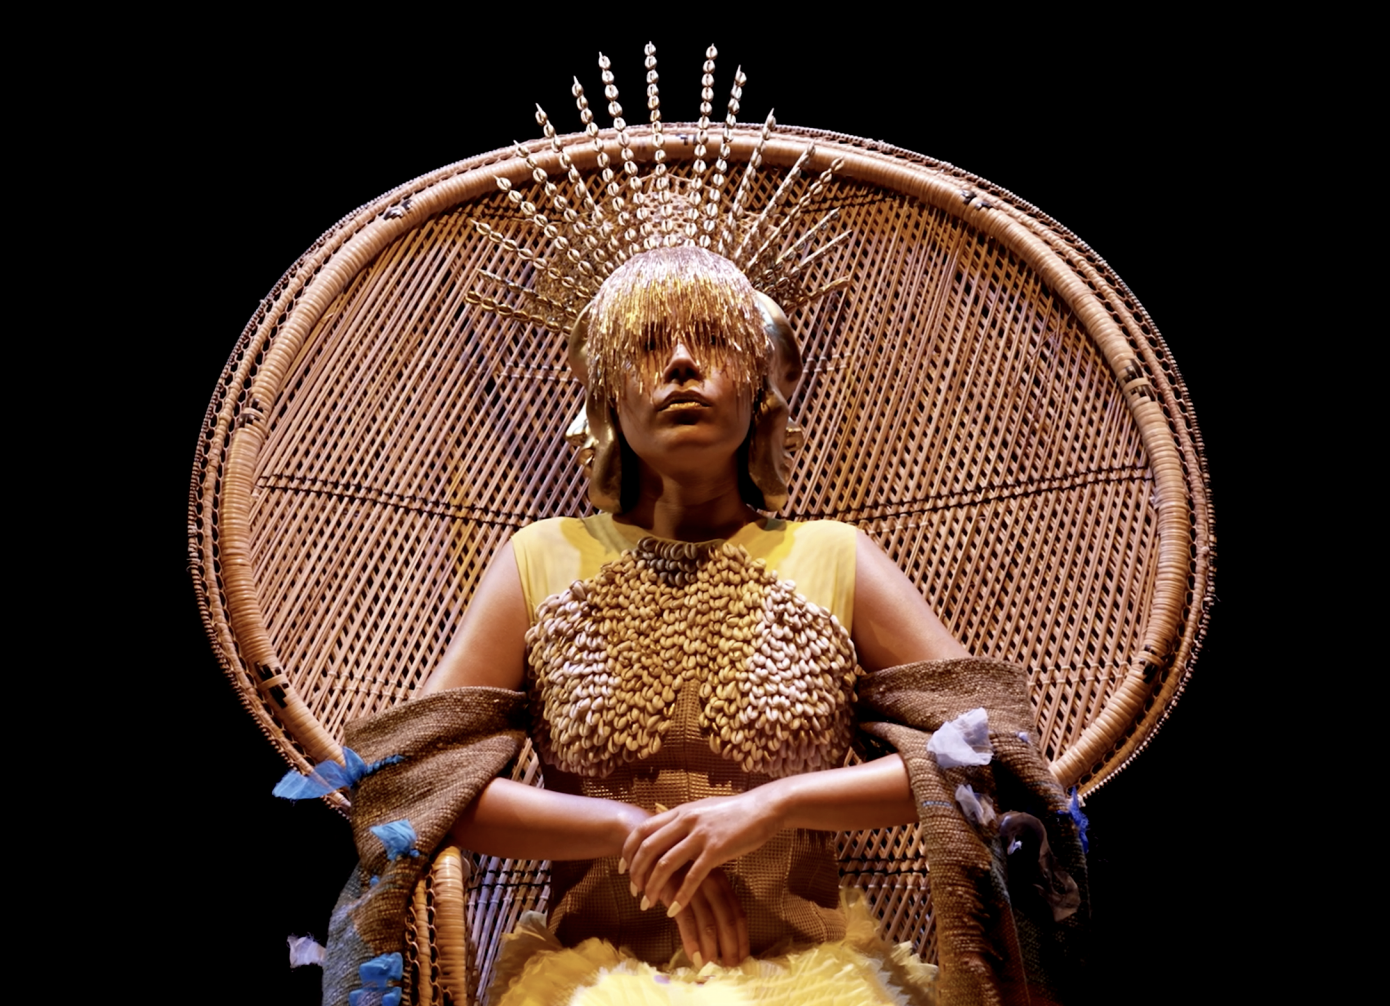 Image of a woman wearing a gold grown and dress seated at a wooden thrown